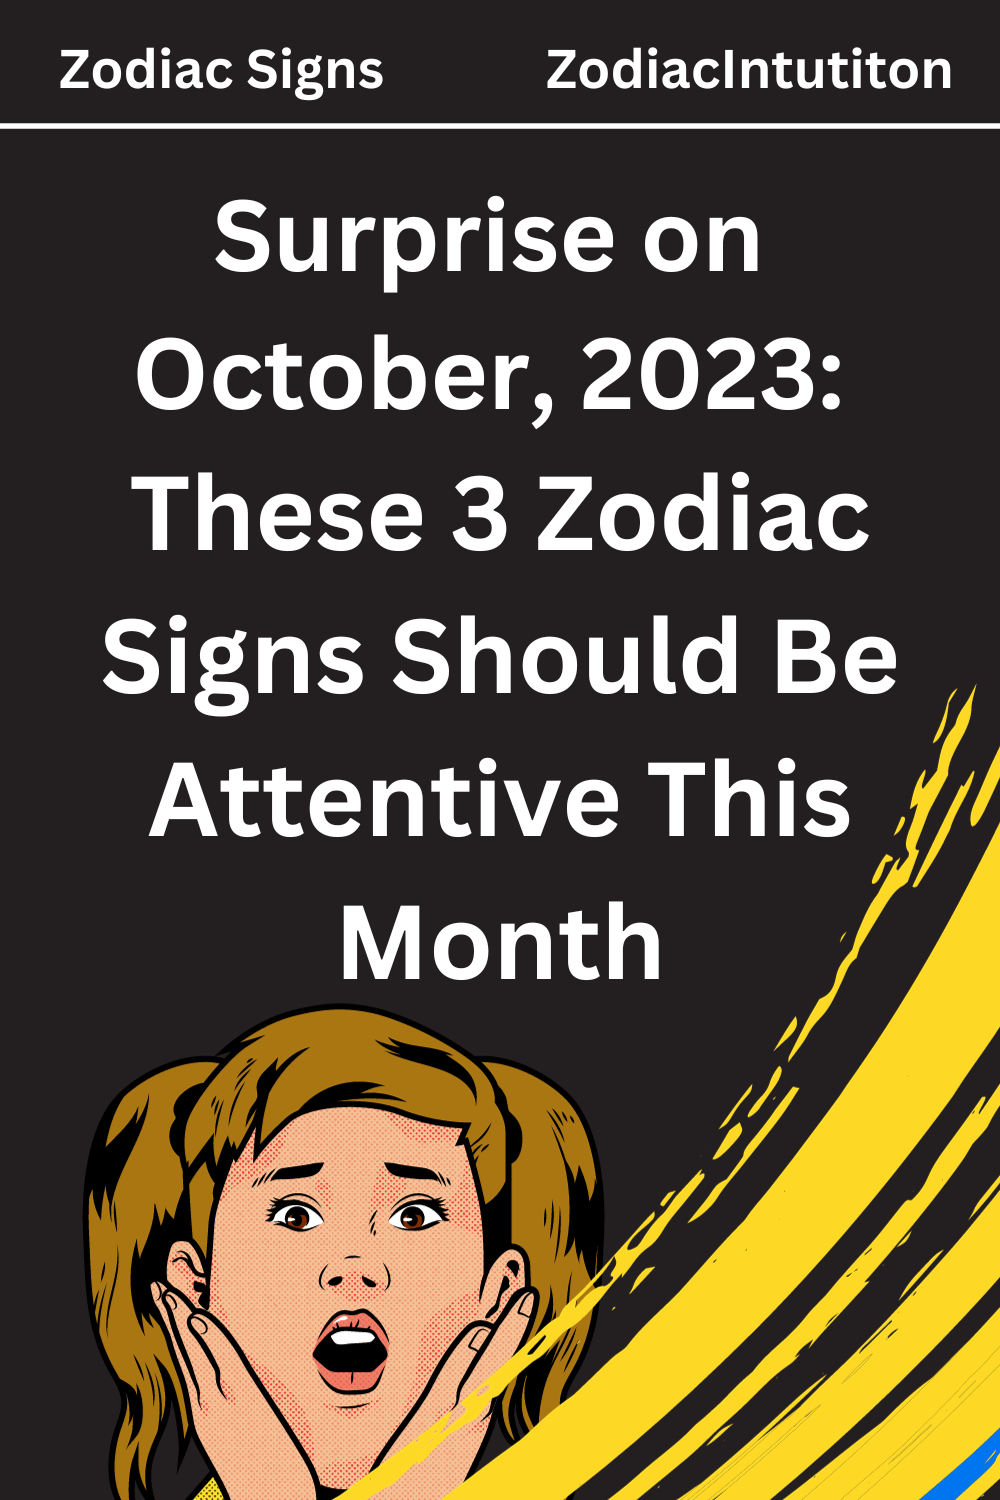 Surprise on October, 2023: These 3 Zodiac Signs Should Be Attentive This Month